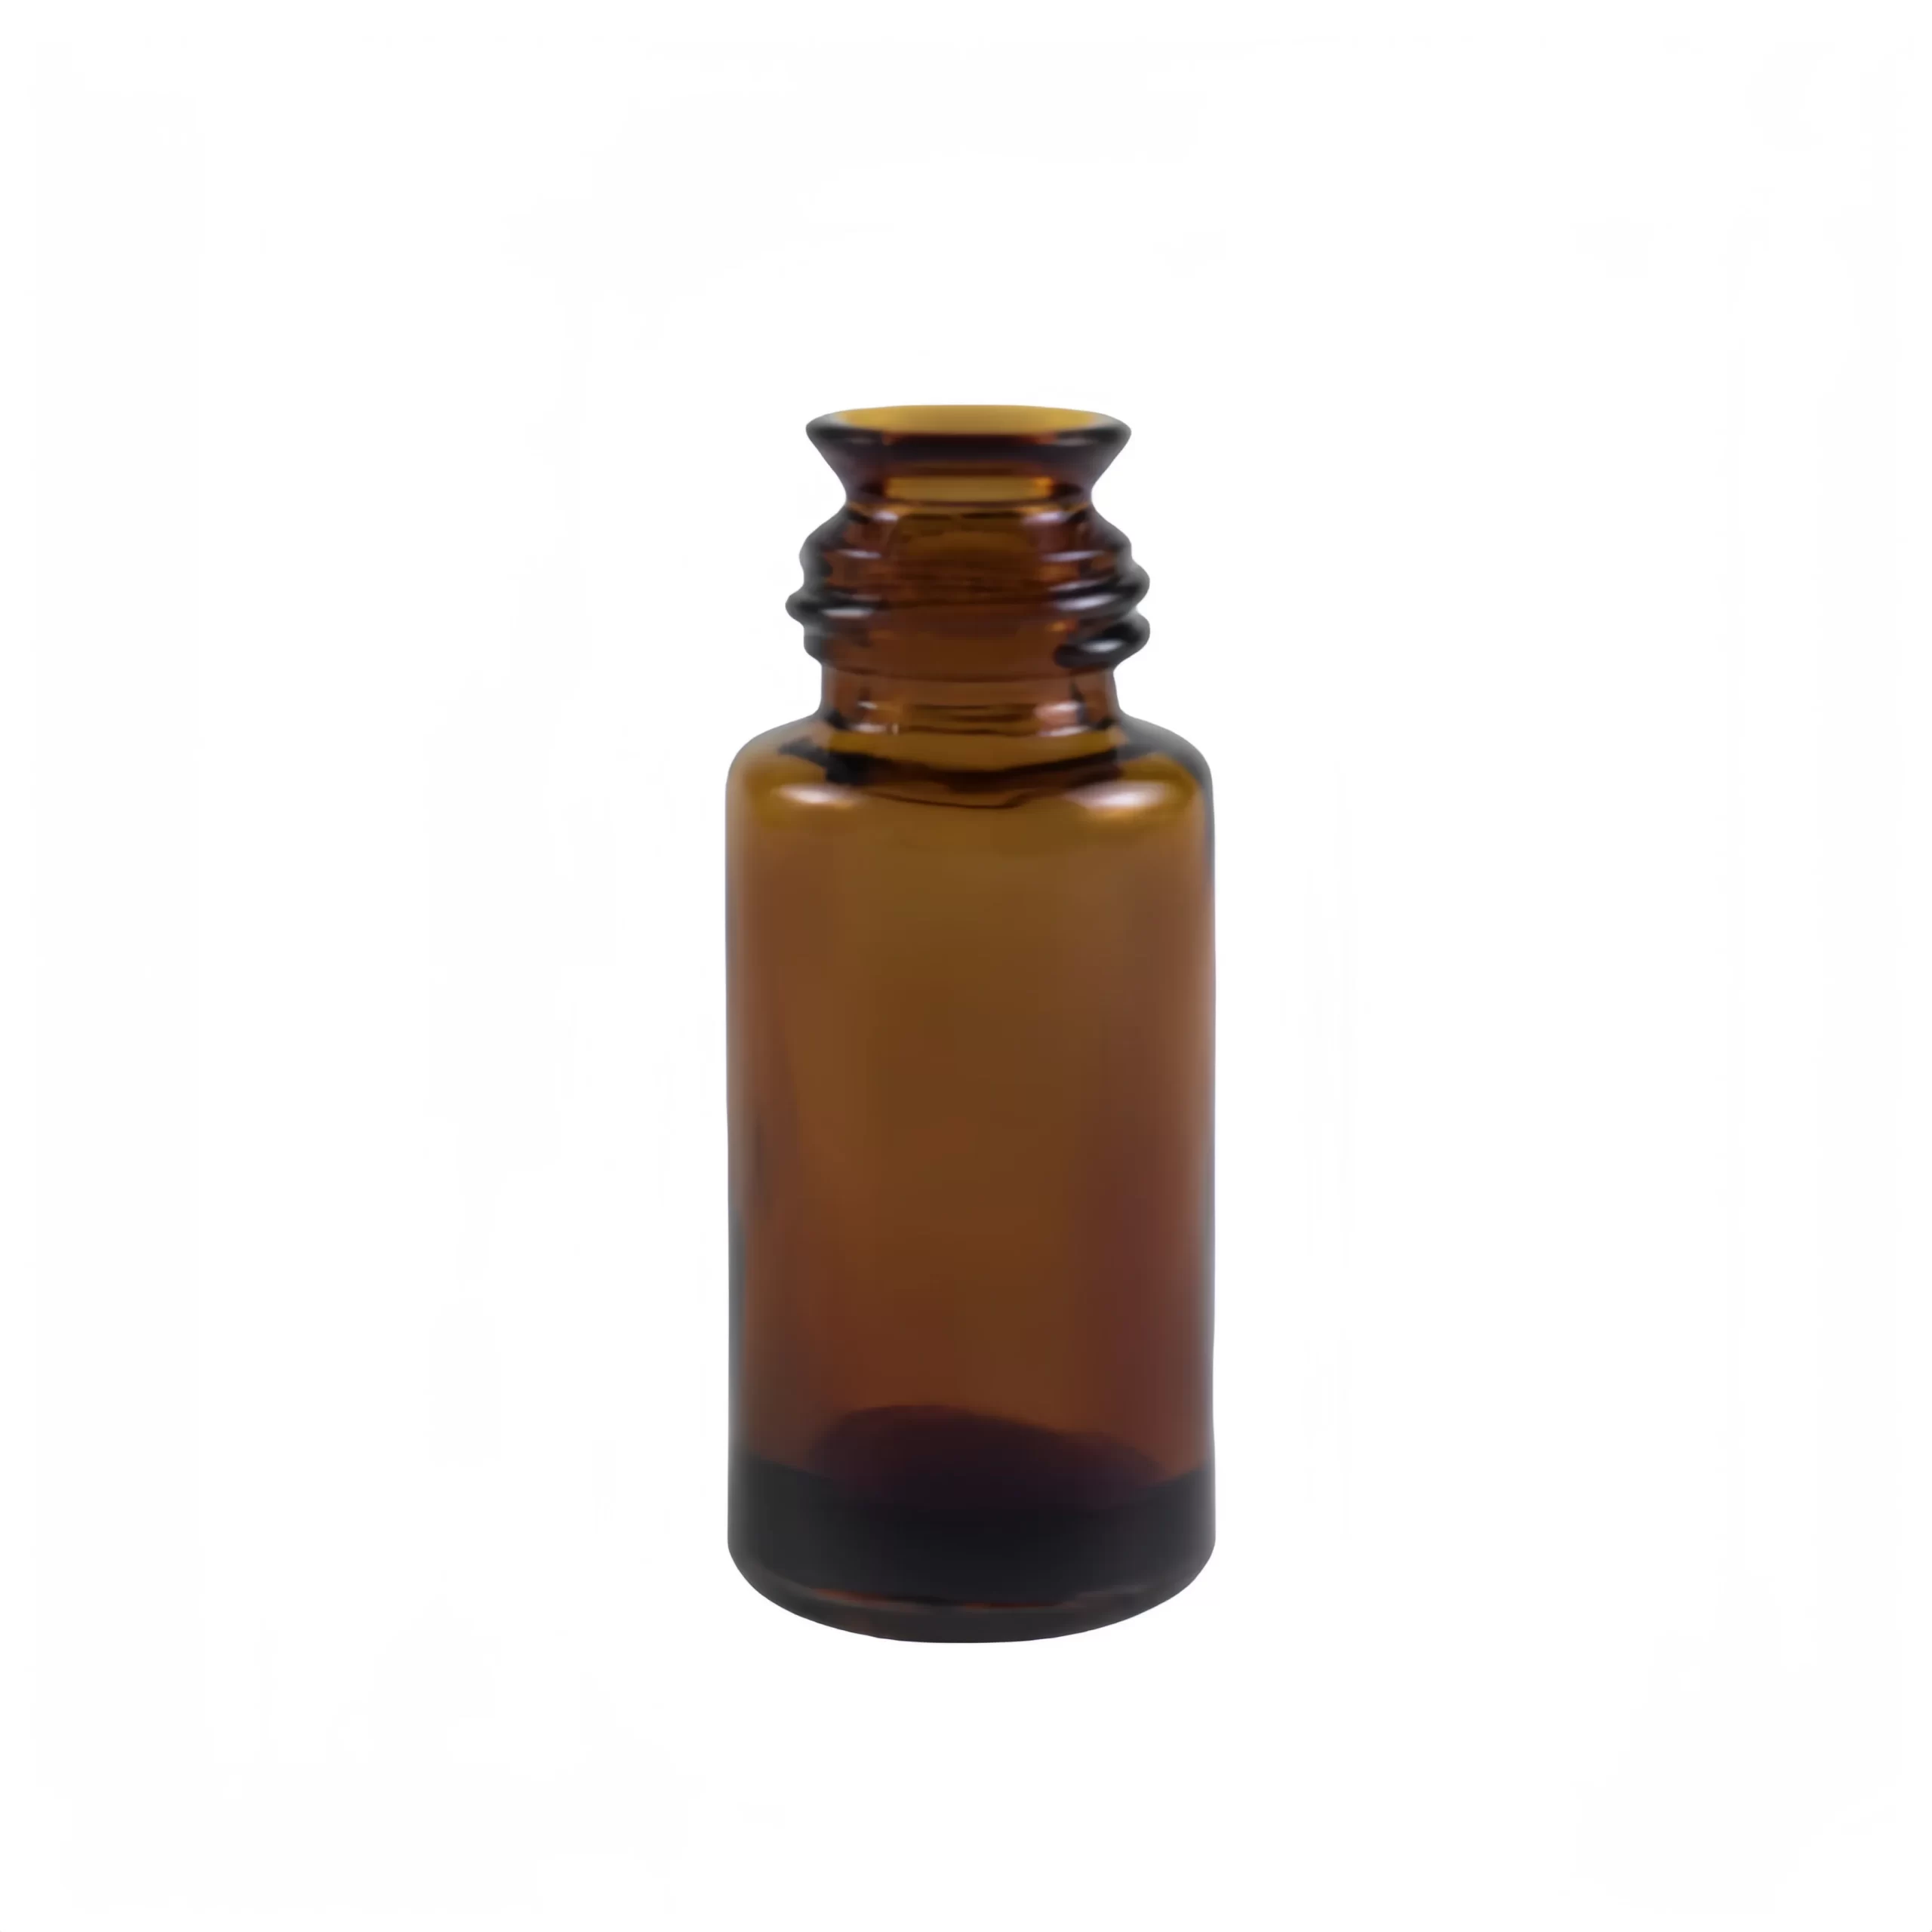 10ml pour out round glass bottle